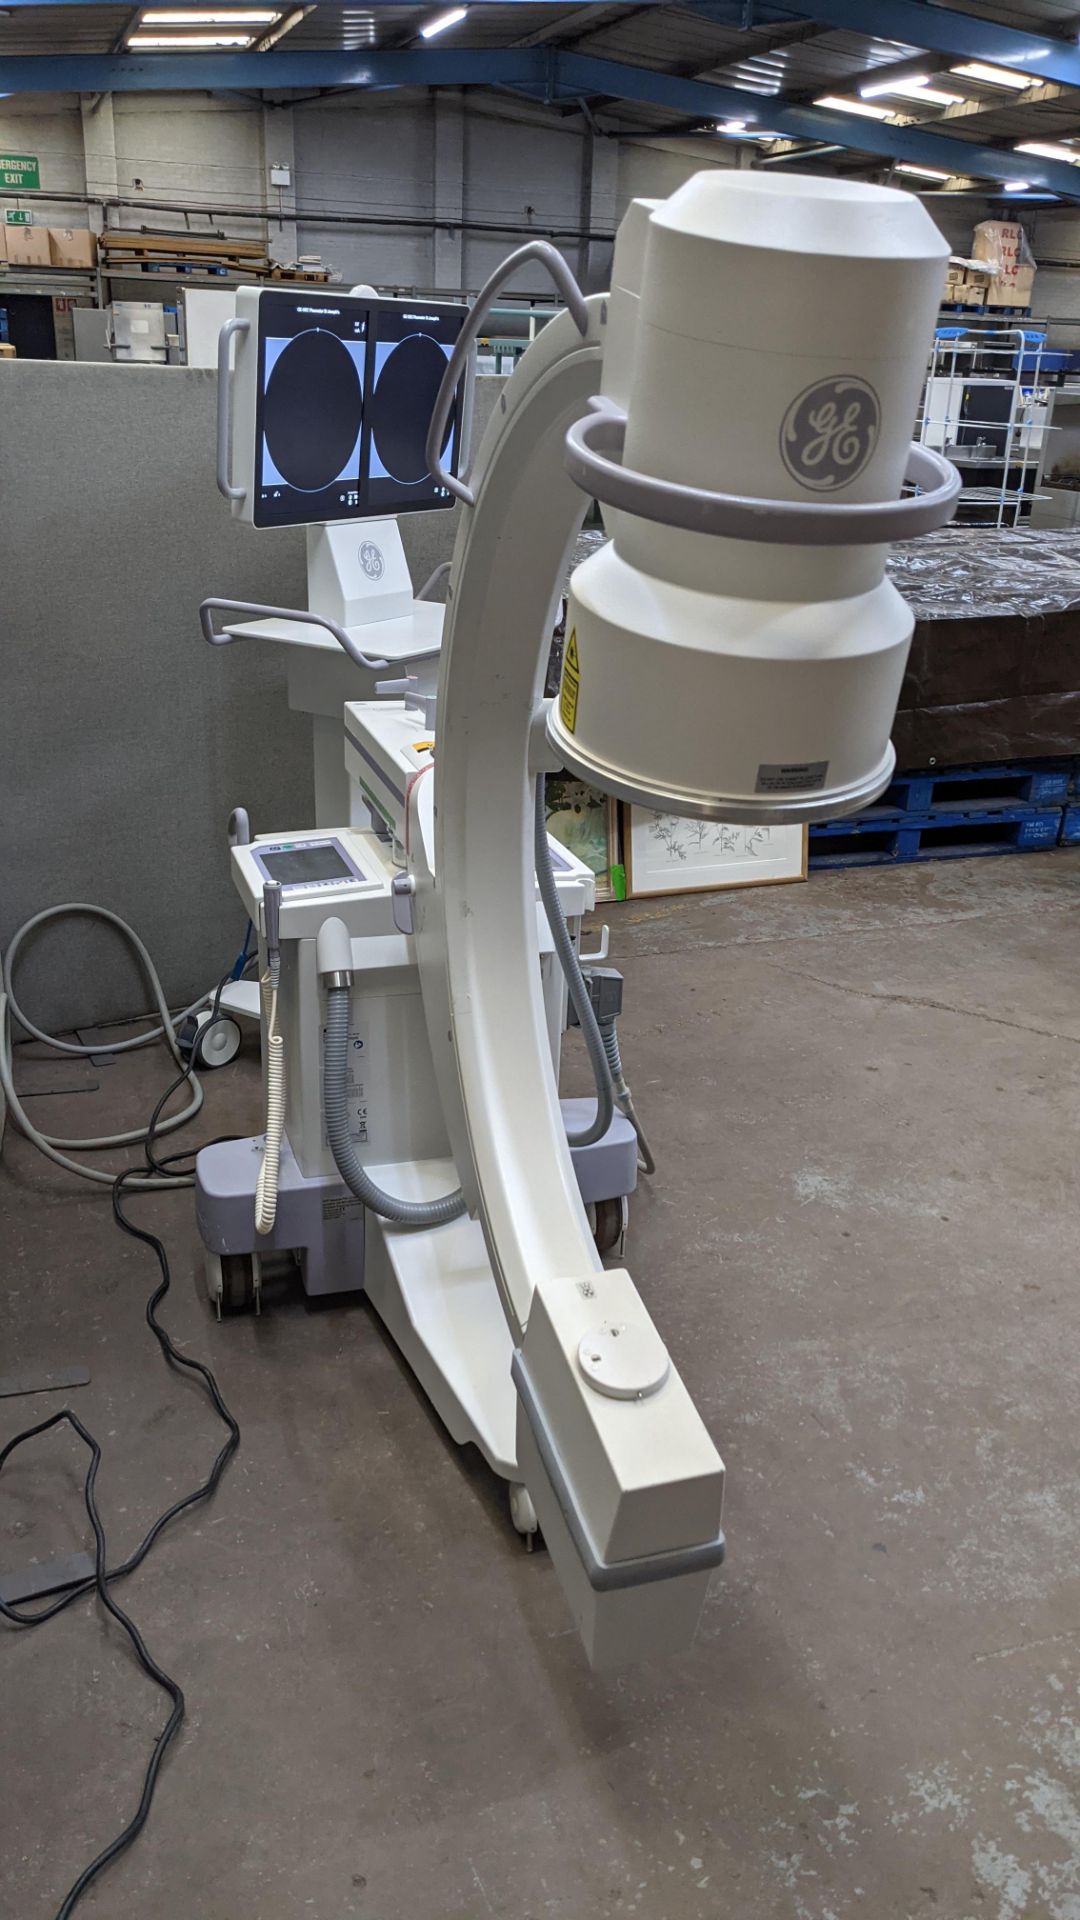 GE-OEC Fluorostar imaging system, purchased new in August 2017. EO4 Series. - Image 10 of 68